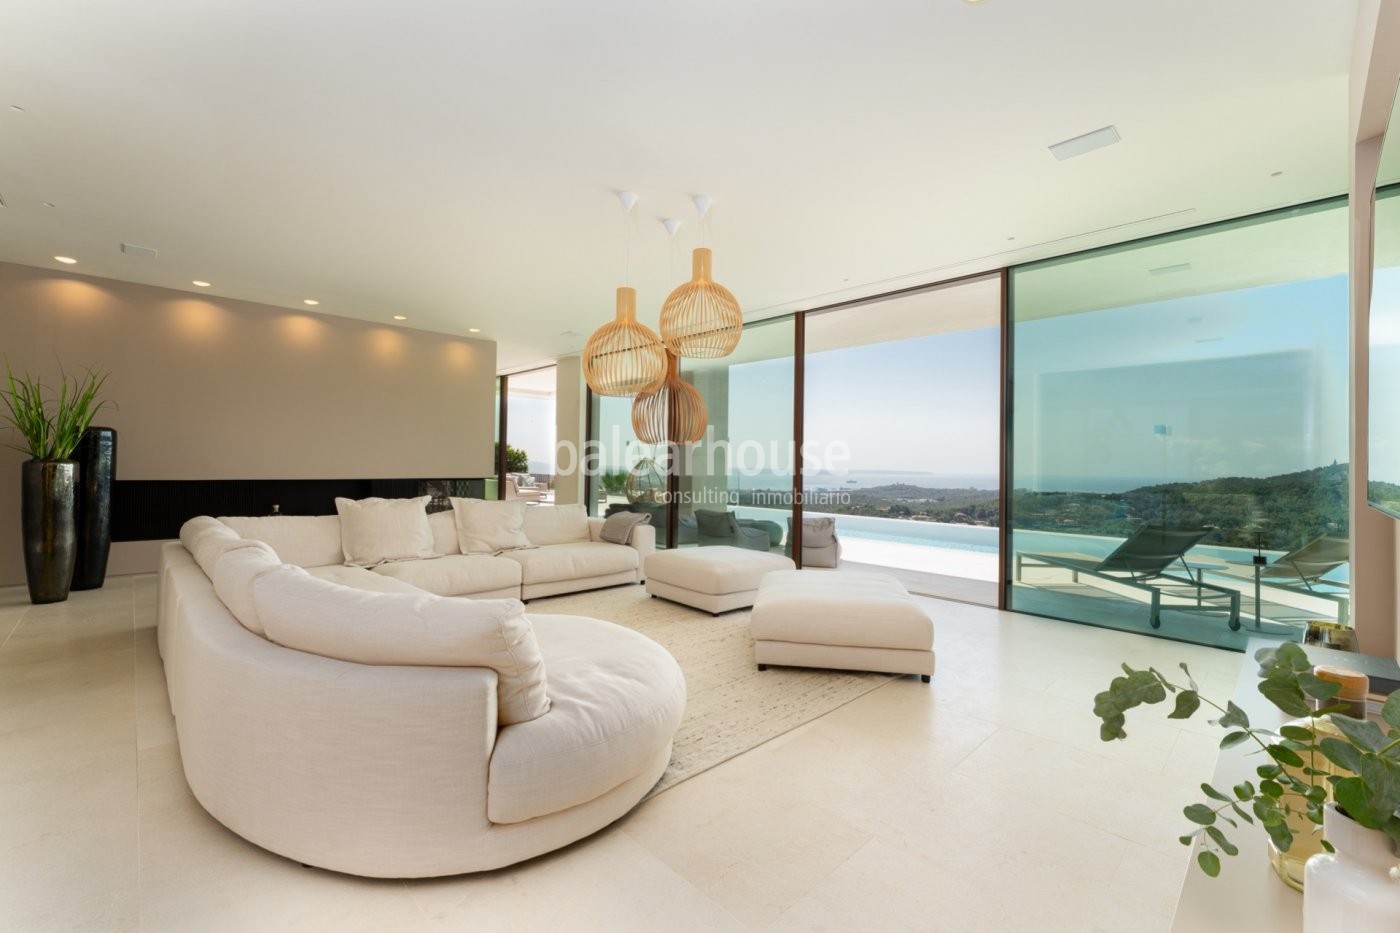 Spectacular designer villa in Son Vida that opens up to the best views of the sea and the city.